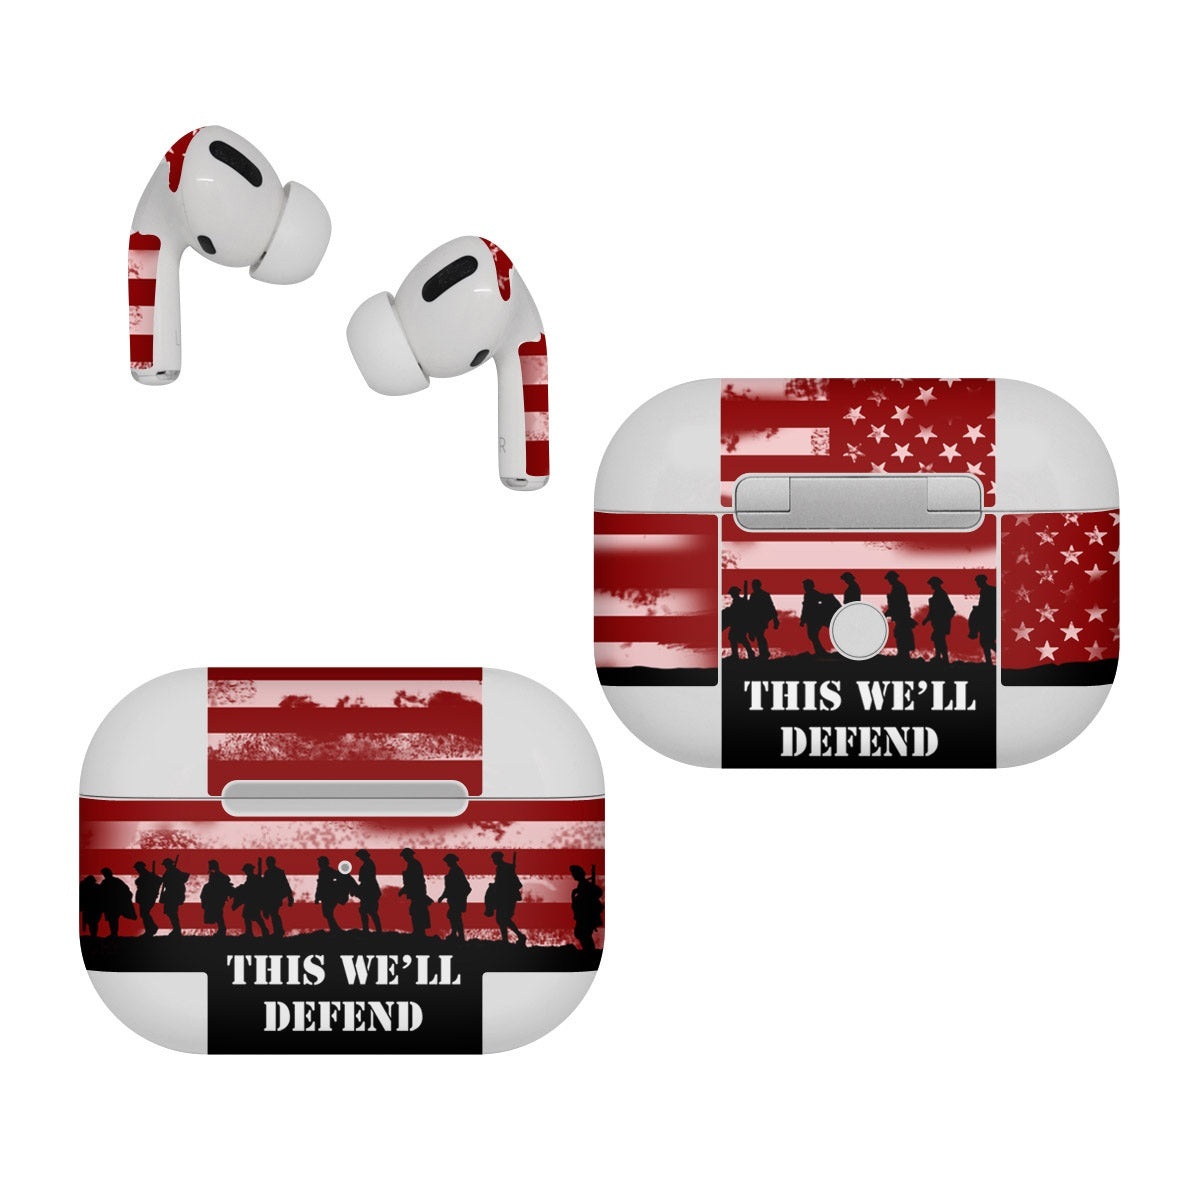 Defend - Apple AirPods Pro Skin